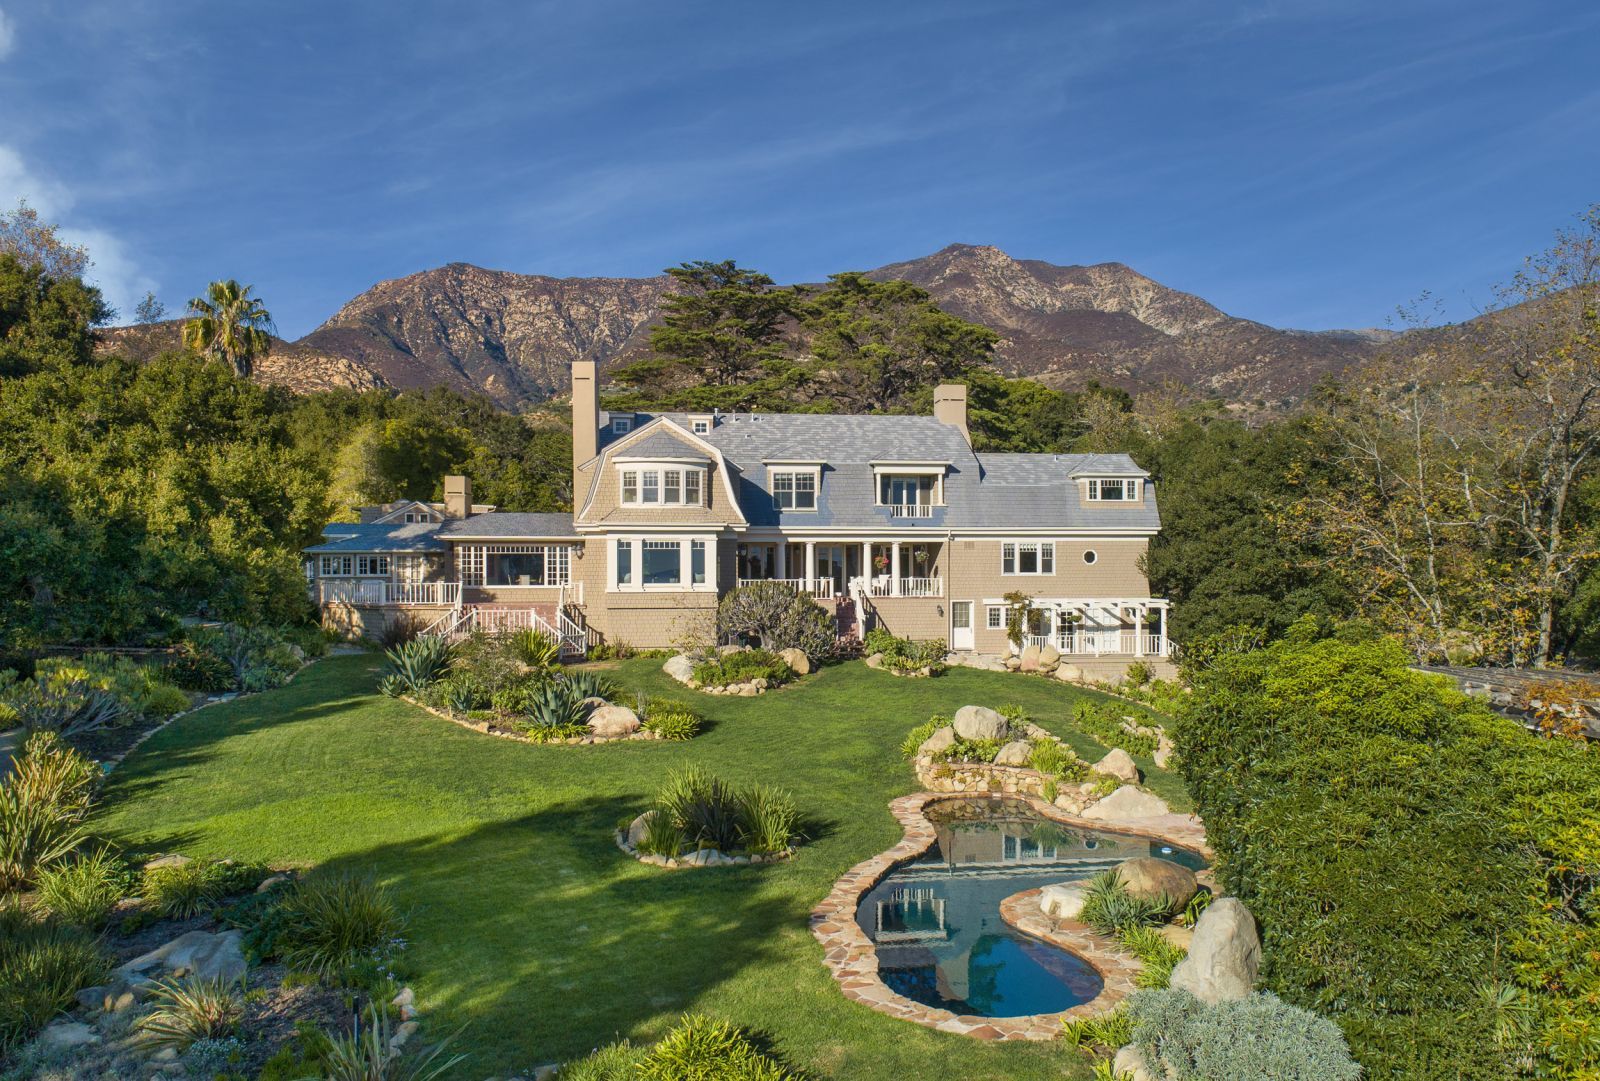 A Cape Cod or the Hamptons style home with mountains in the background and a sparkling pool in the lush green yard.